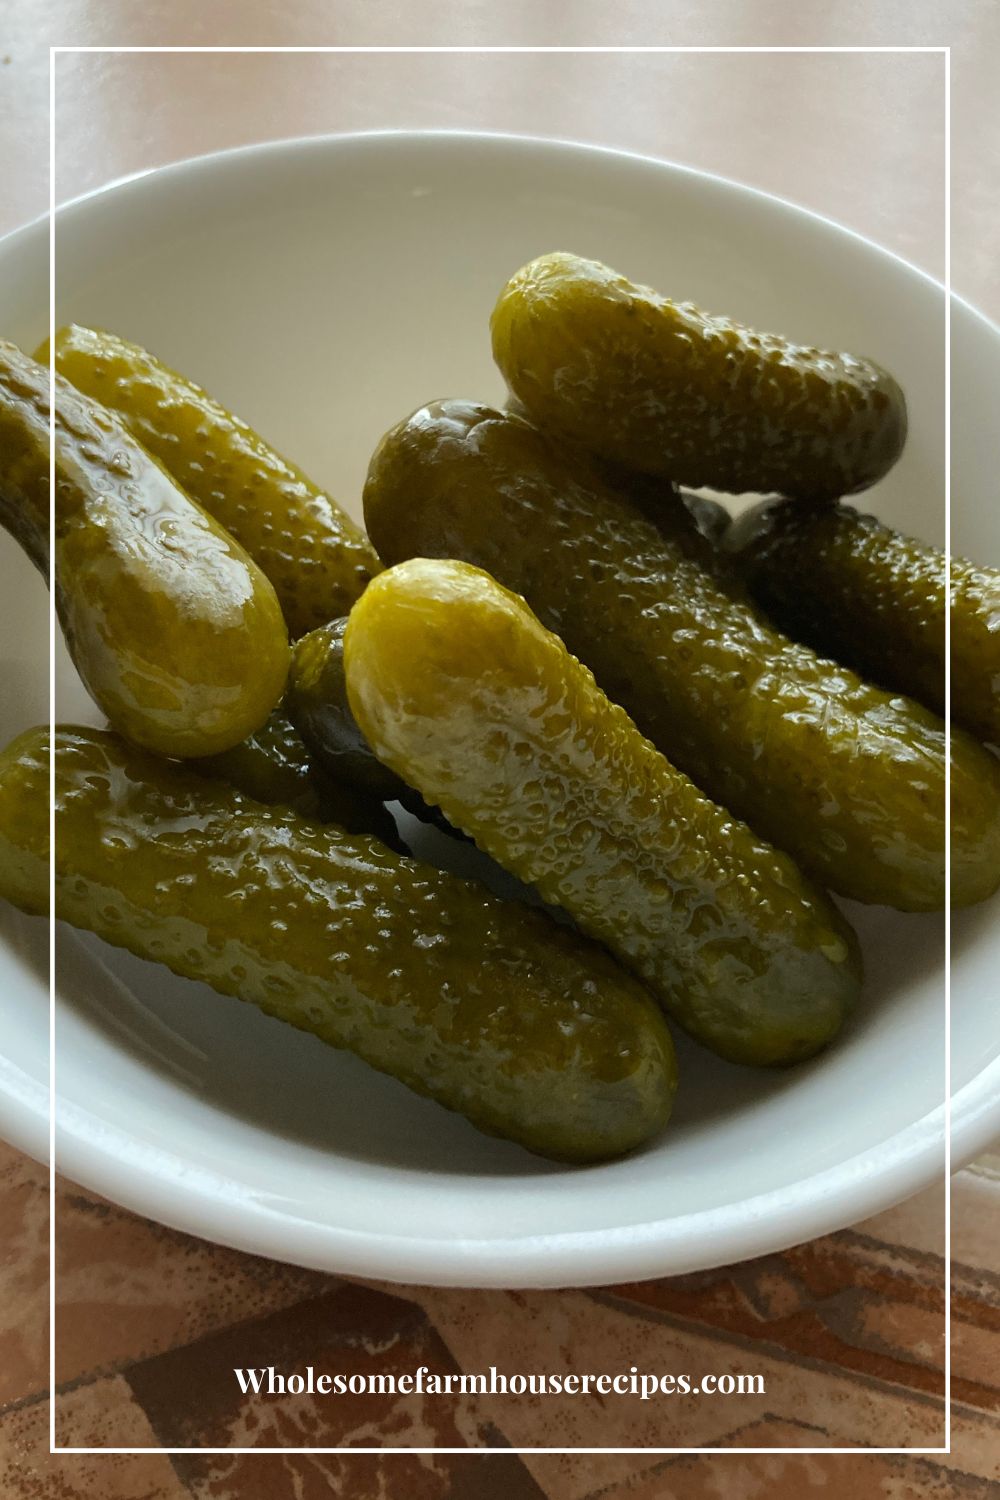 How to Make Sweet Pickles from Store Bought Dill Pickles